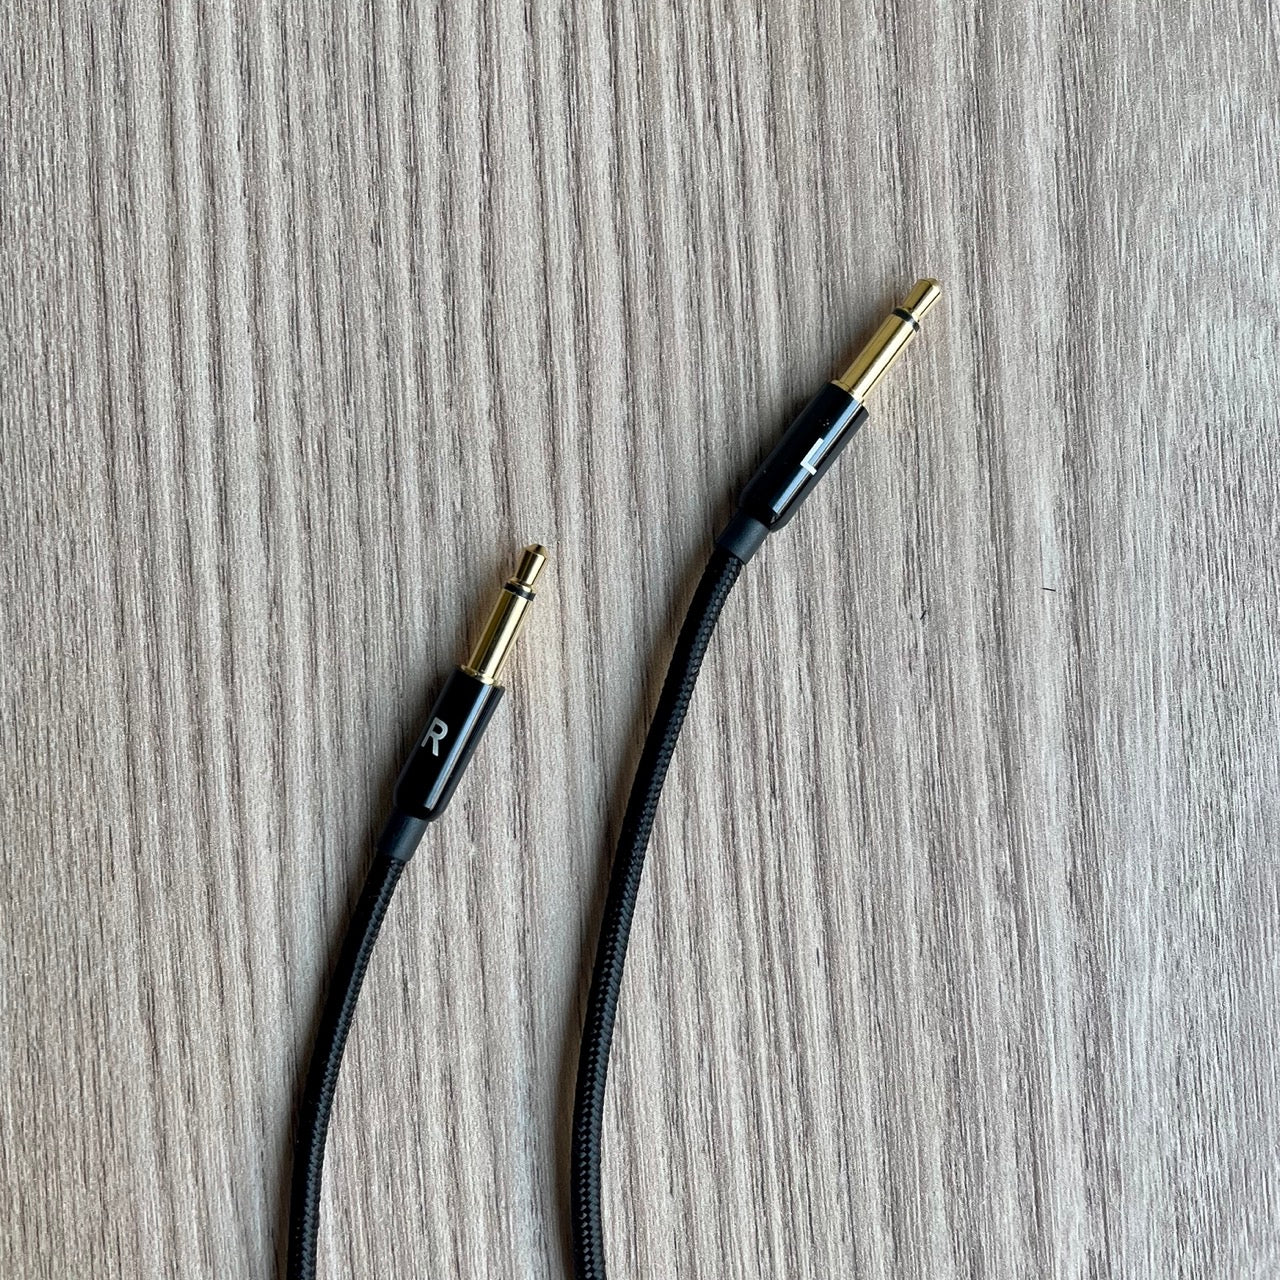 EarAudio Headphone Replacement Cable